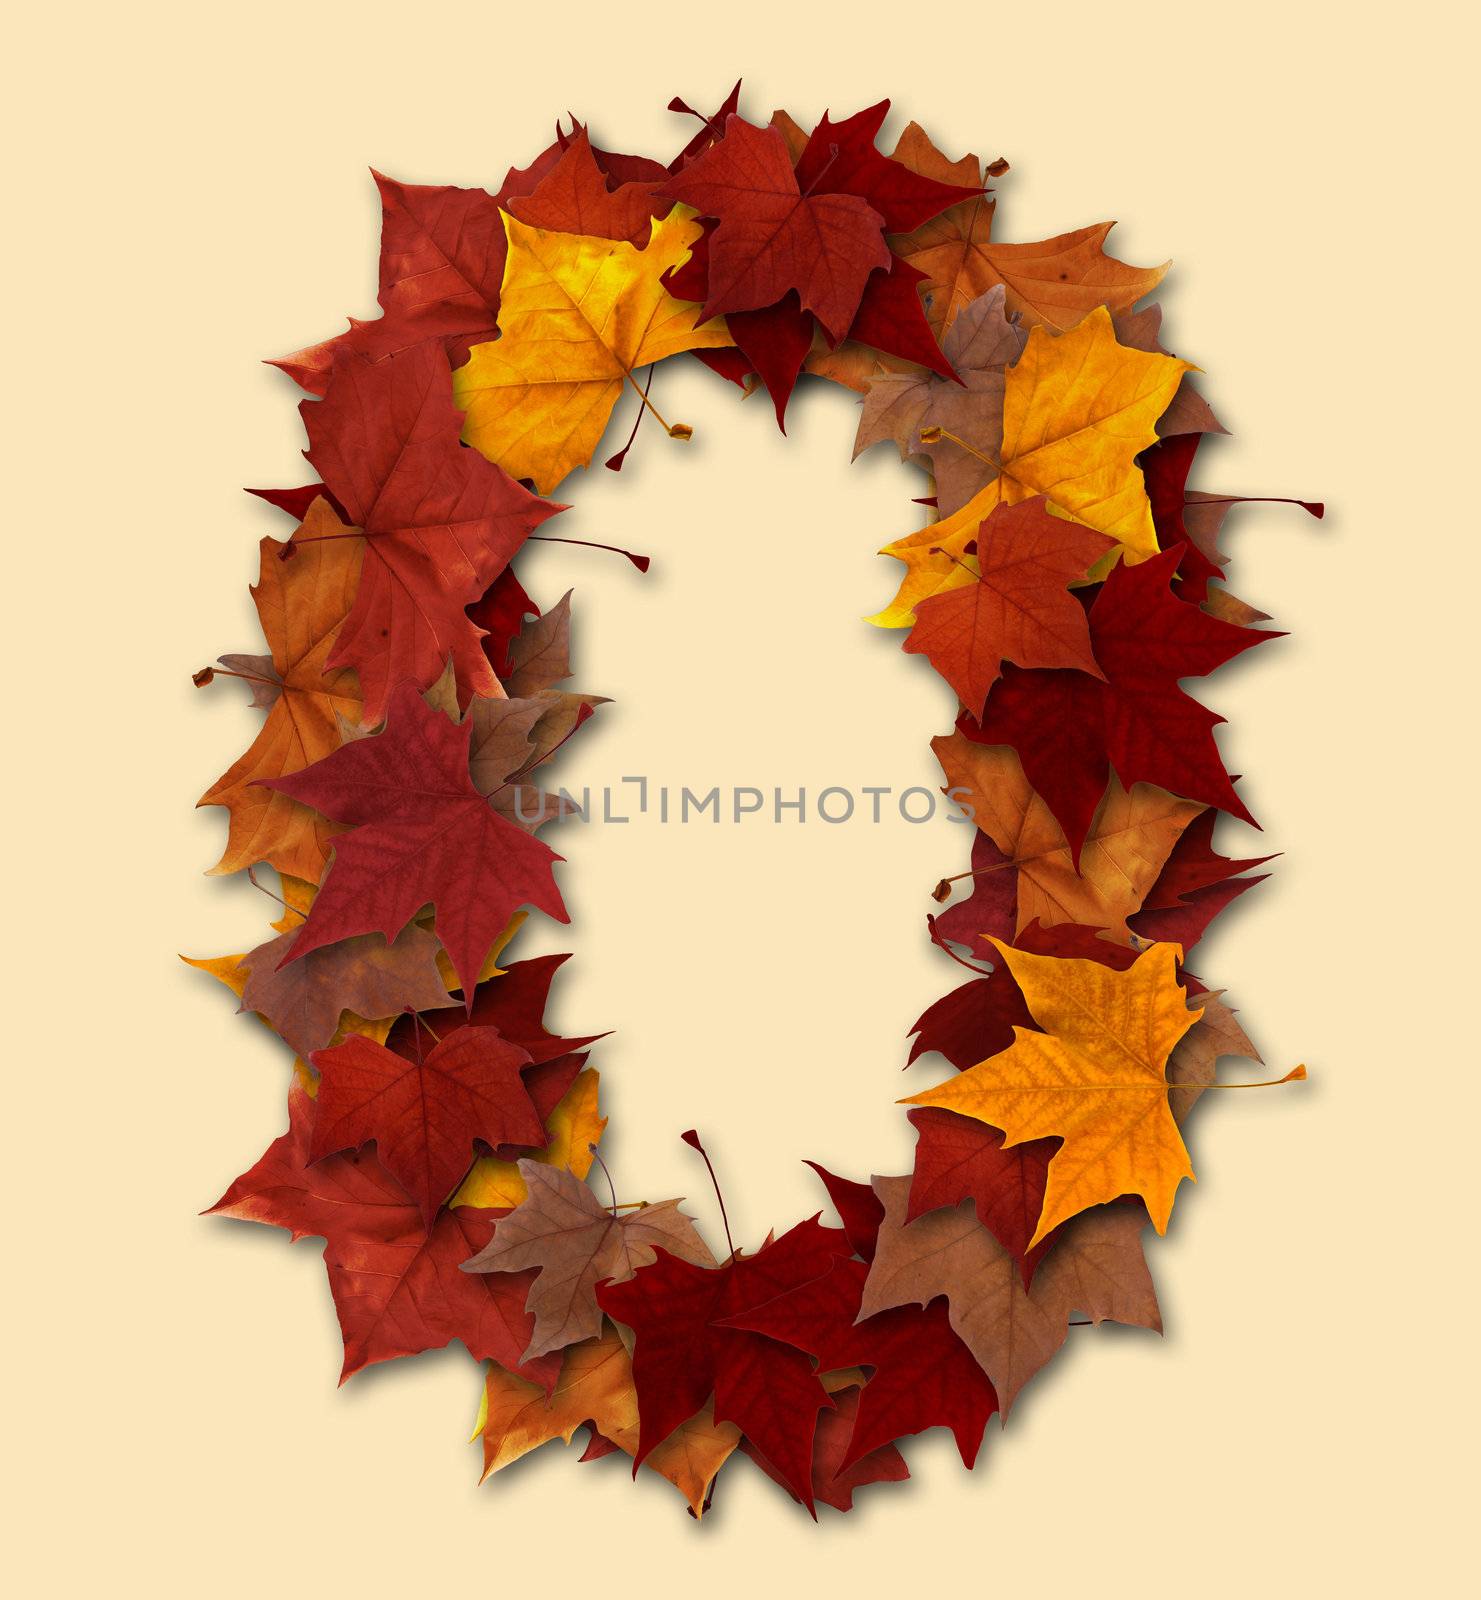 Number 0 drop shadow made with autumn leaves Isolated with clipping path, so you can easily cut it out and place over the top of a design. Find others types in our portfolio to compose your own words.